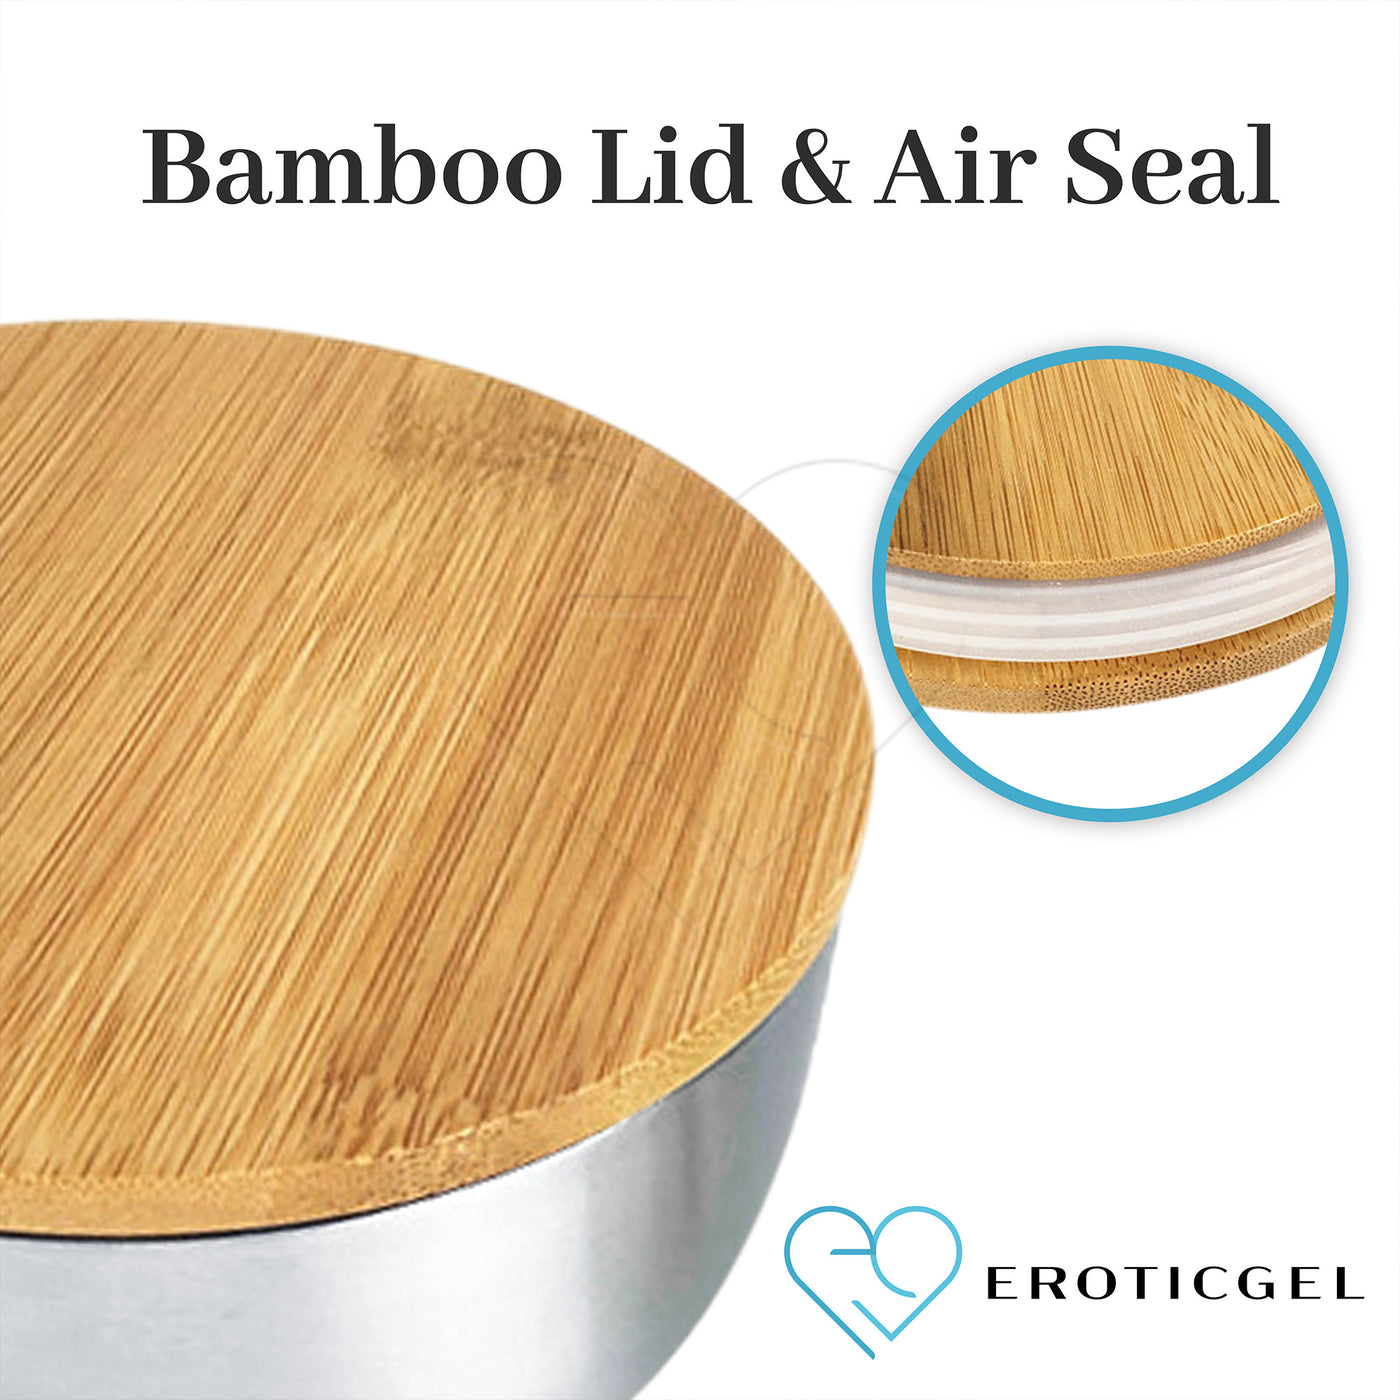 Eroticgel 500ml Massage Gel Stainless Steel Bowl with Bamboo Lid